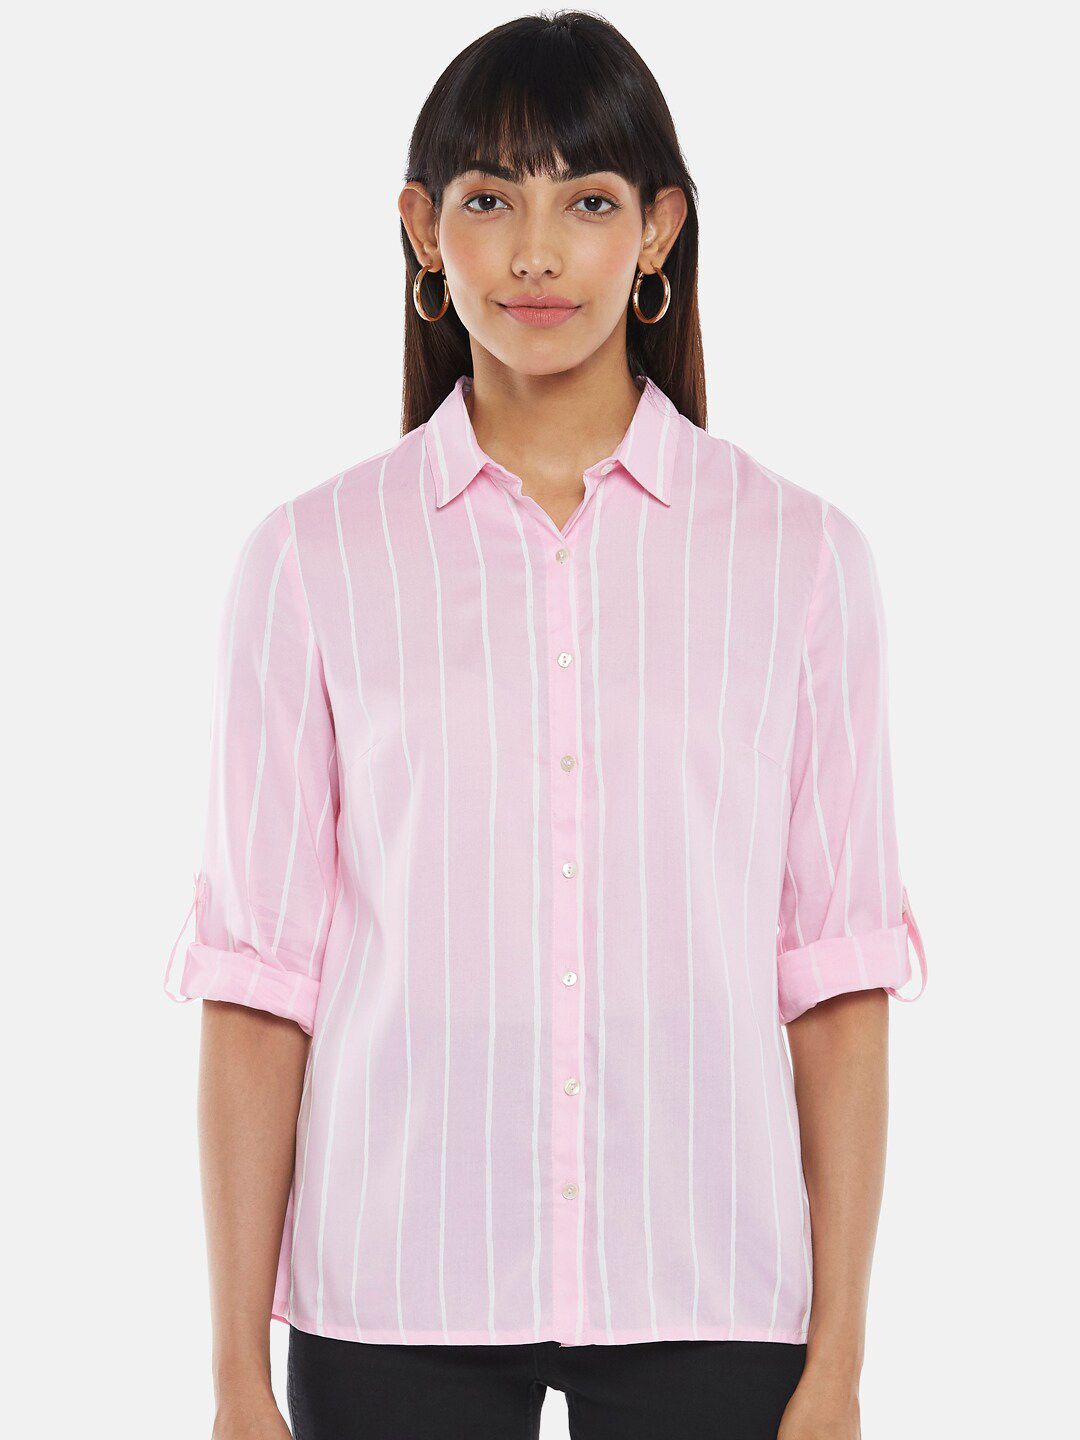 Honey by Pantaloons Pink Striped Roll-Up Sleeves Shirt Style Top Price in India